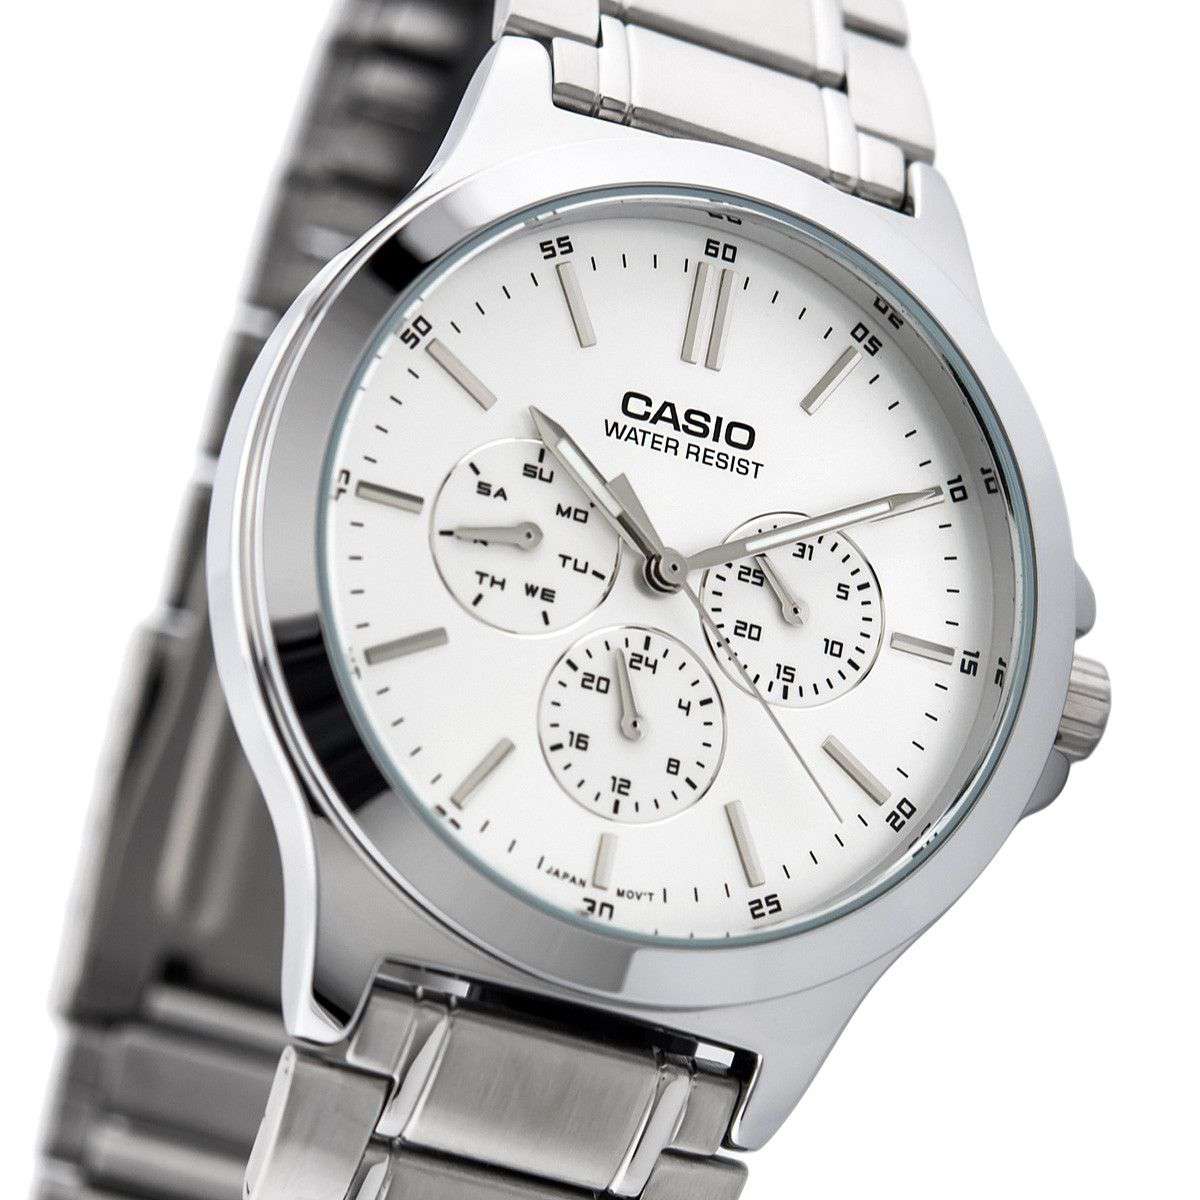 Casio MTP-V300D-7A Silver Stainless Watch for Men-Watch Portal Philippines